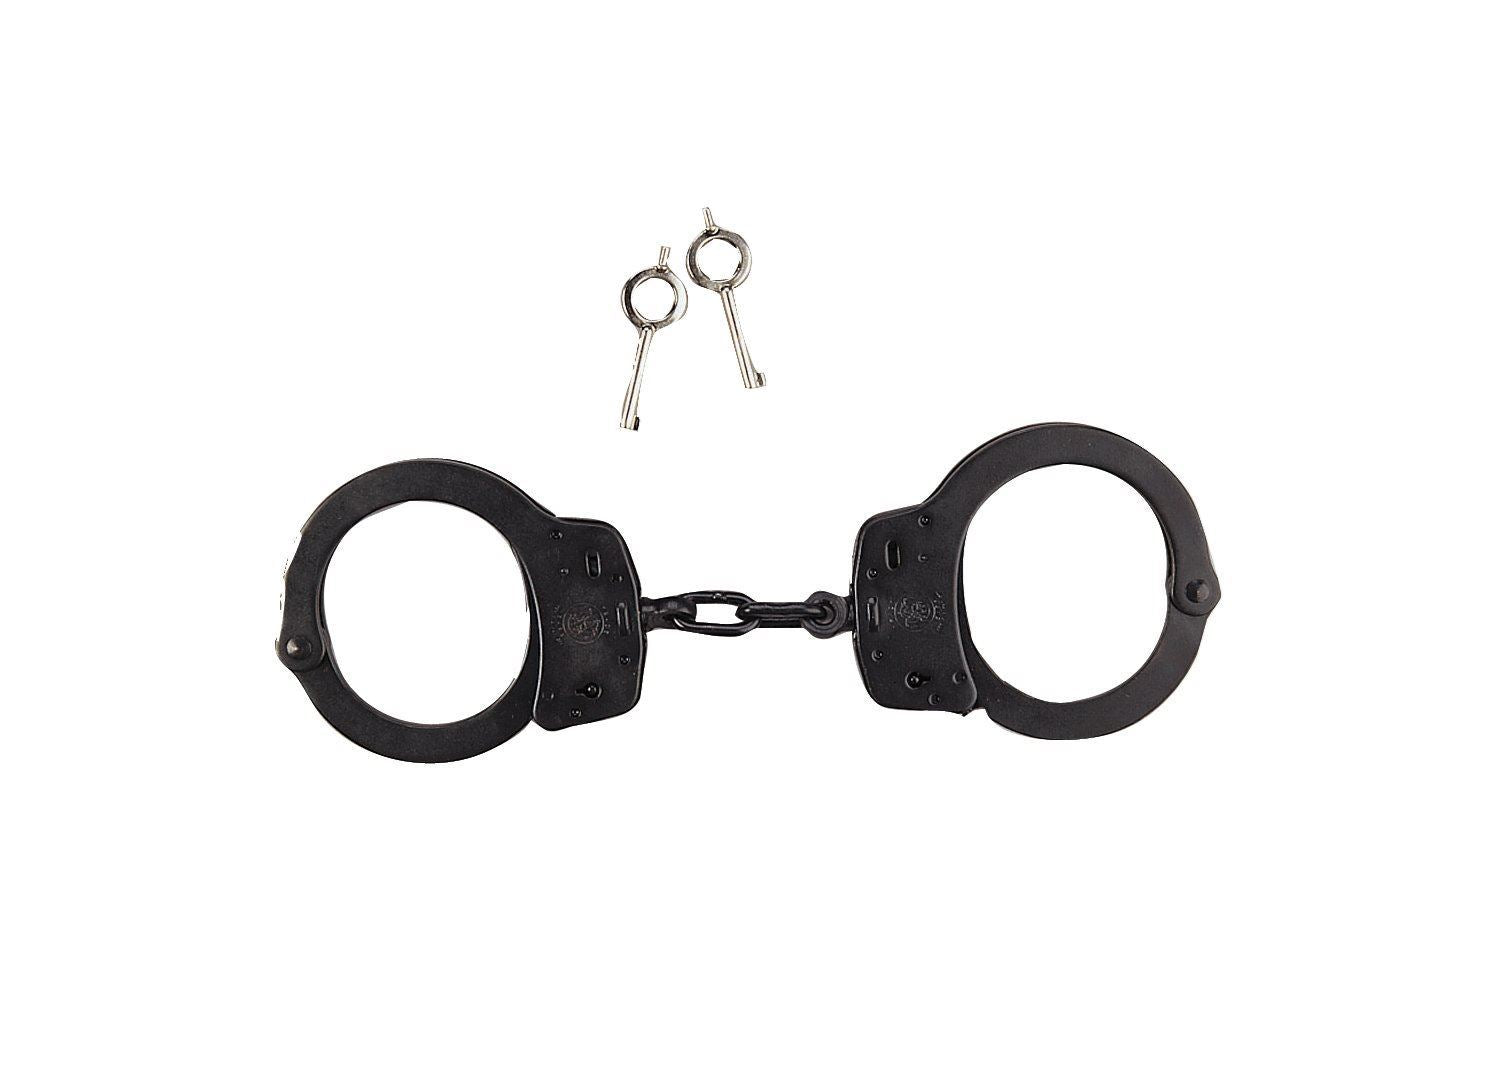 Tactical Smith & Wesson Handcuffs Color : Black (1 per pack)